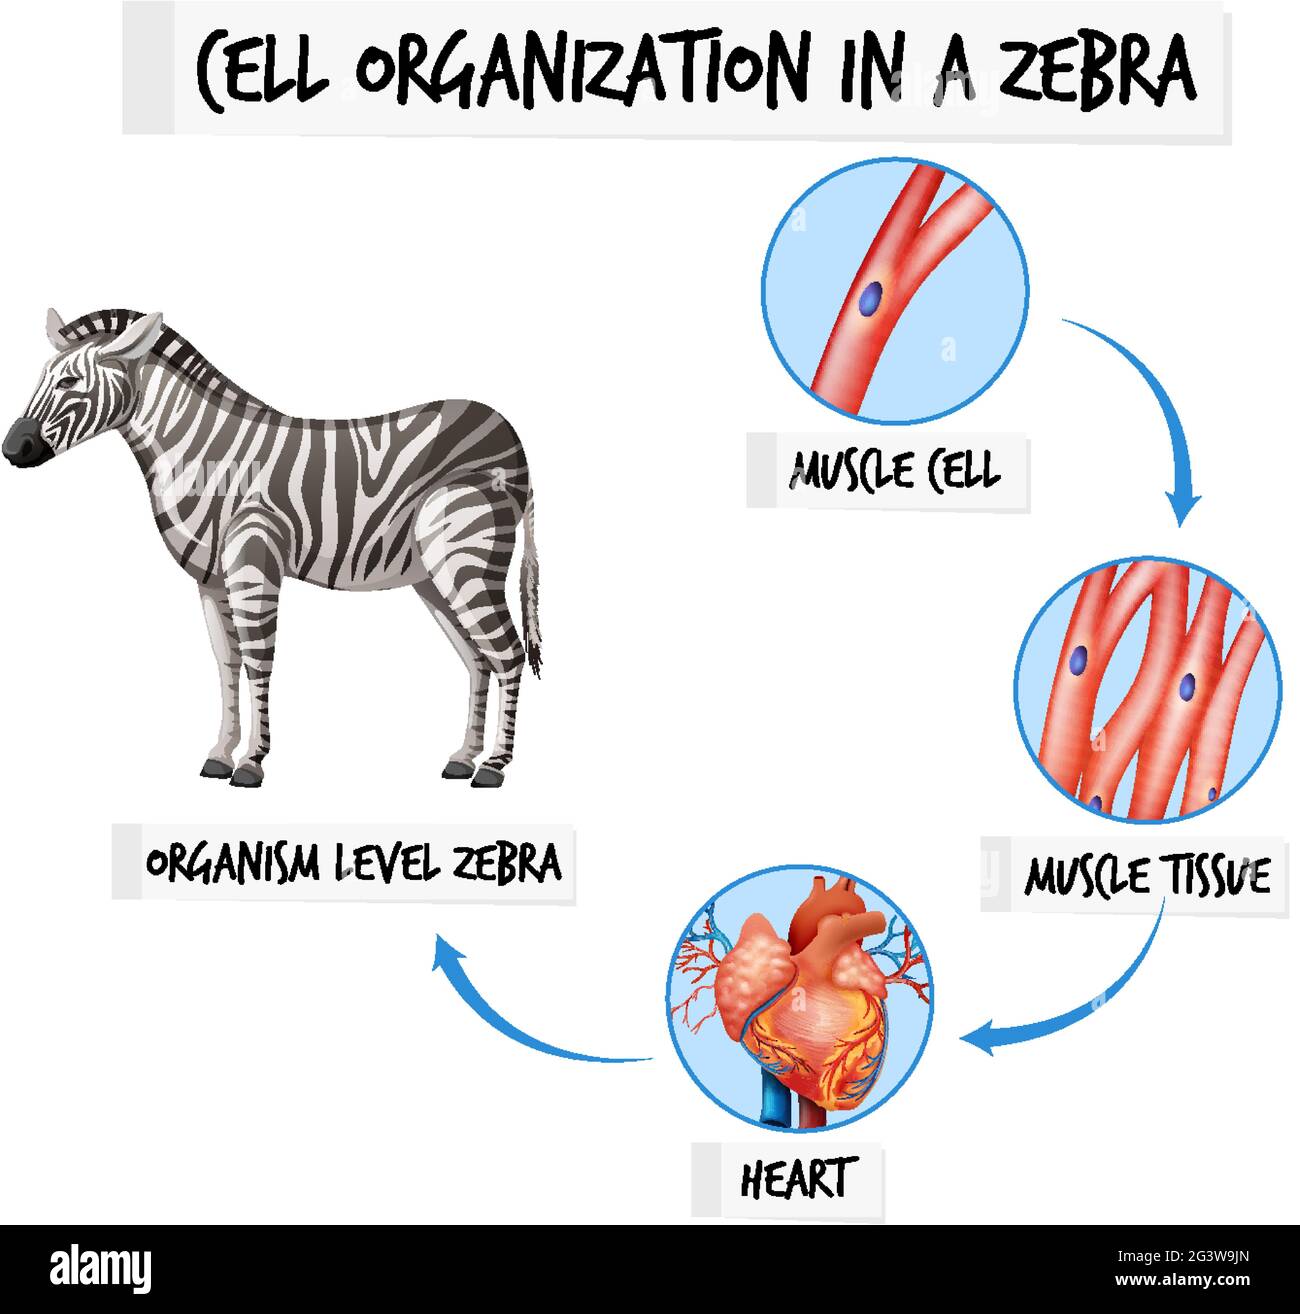 Diagram showing cell organization in a zebra illustration Stock Vector  Image & Art - Alamy